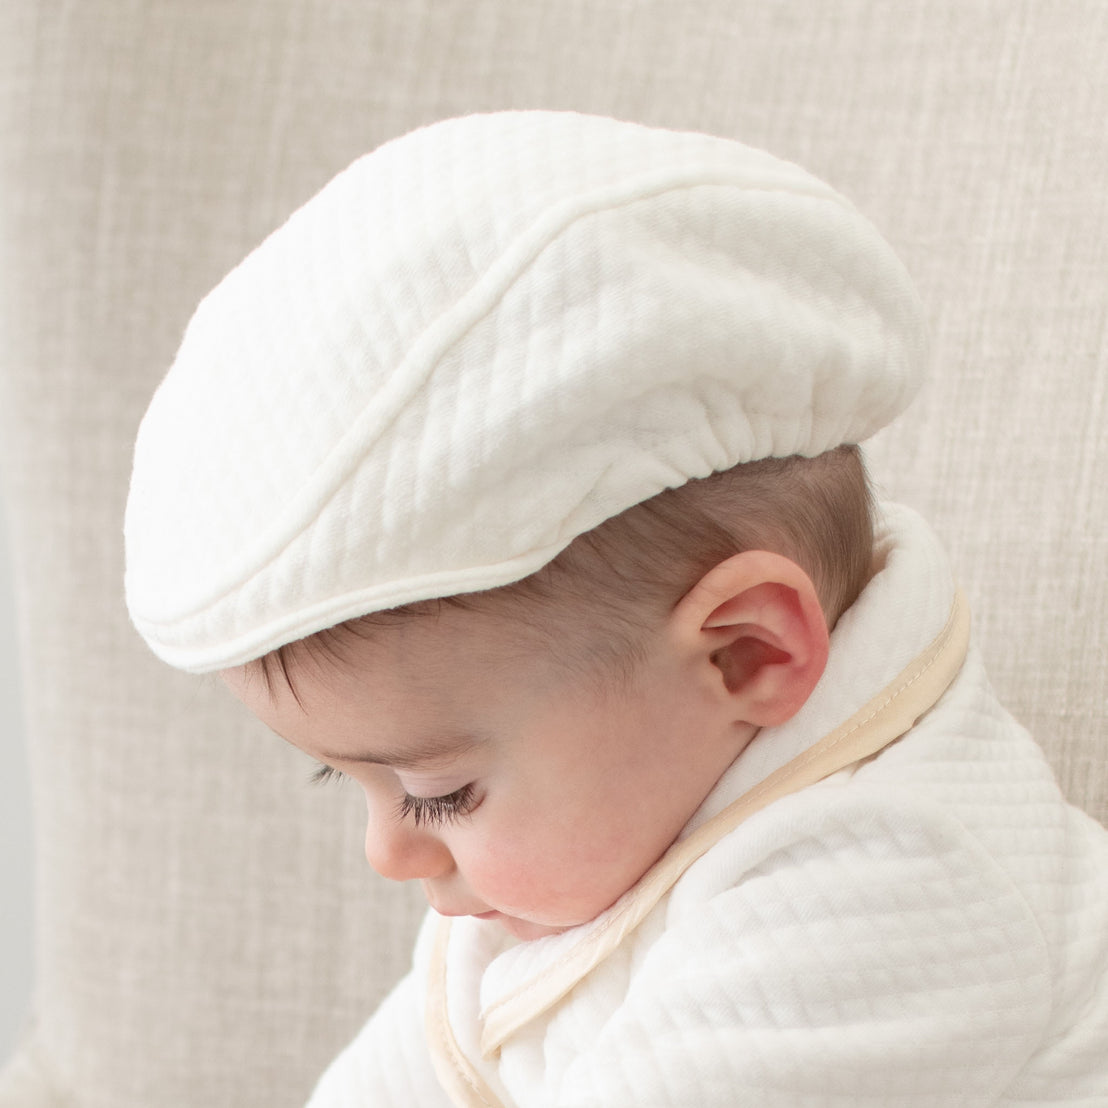 Baby boy sitting on a chair. He is wearing the Liam Newsboy Cap made of white quilt